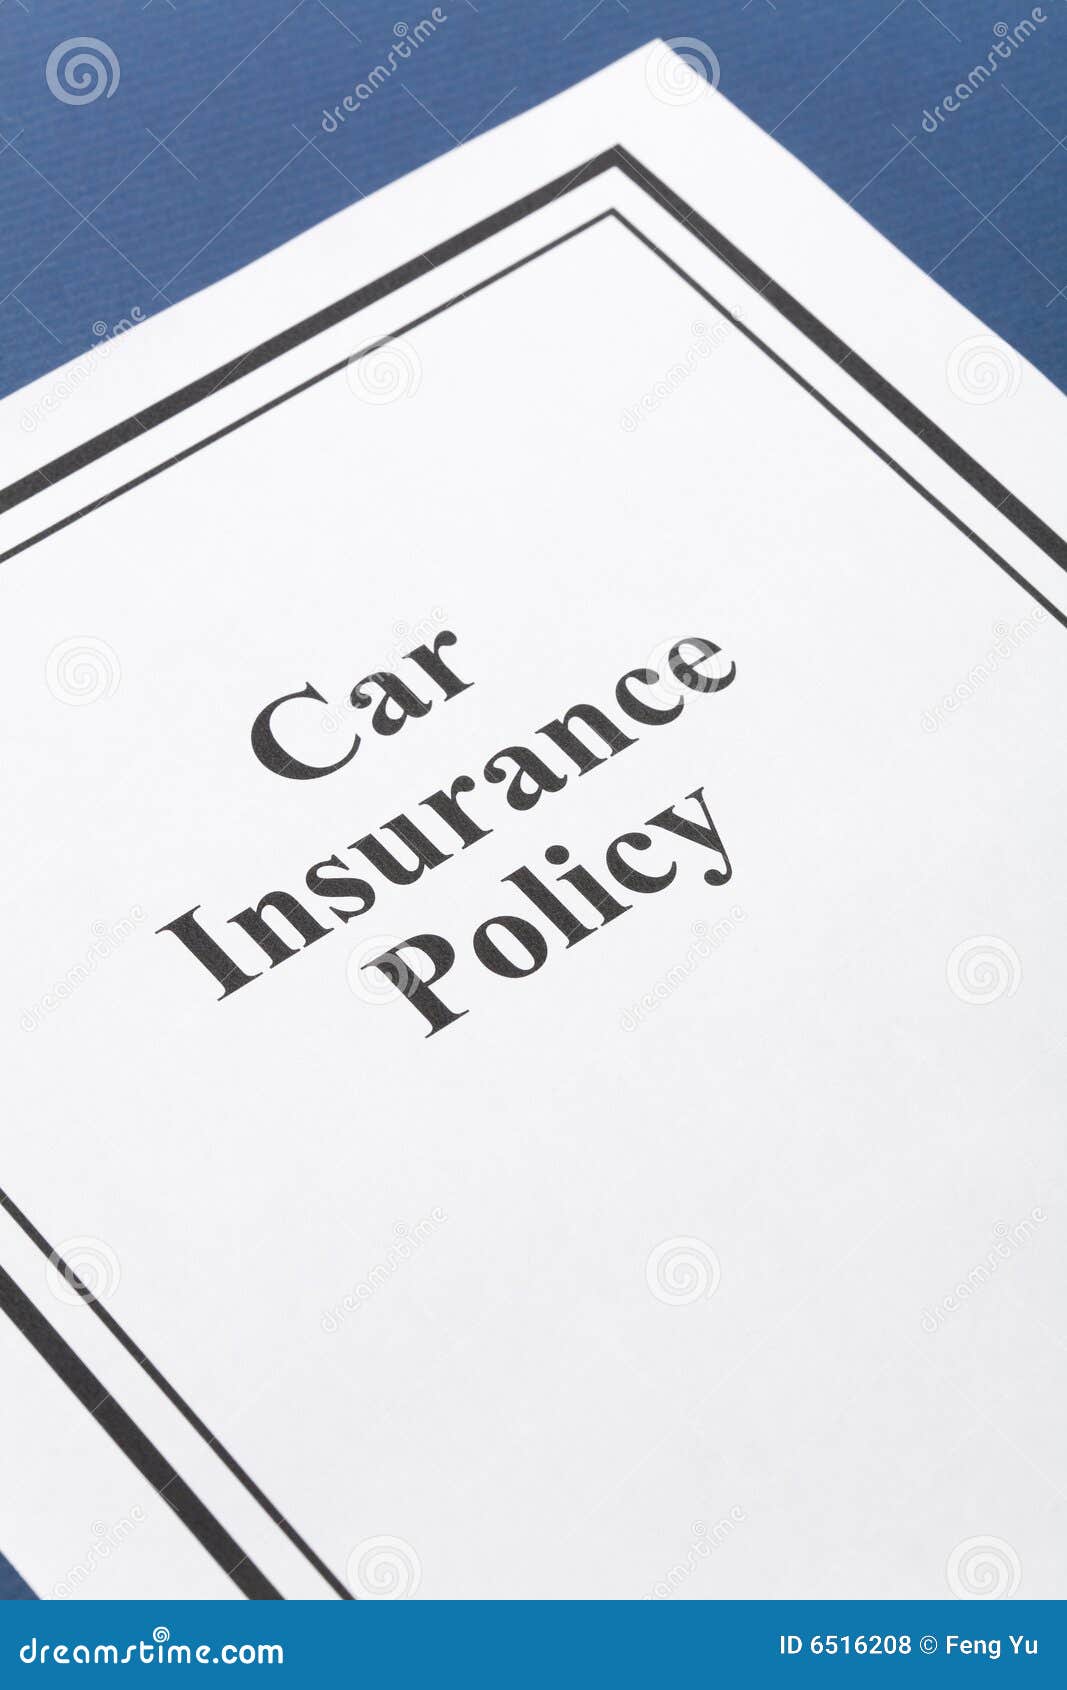 Car Insurance Policy Royalty Free Stock Photos - Image: 6516208